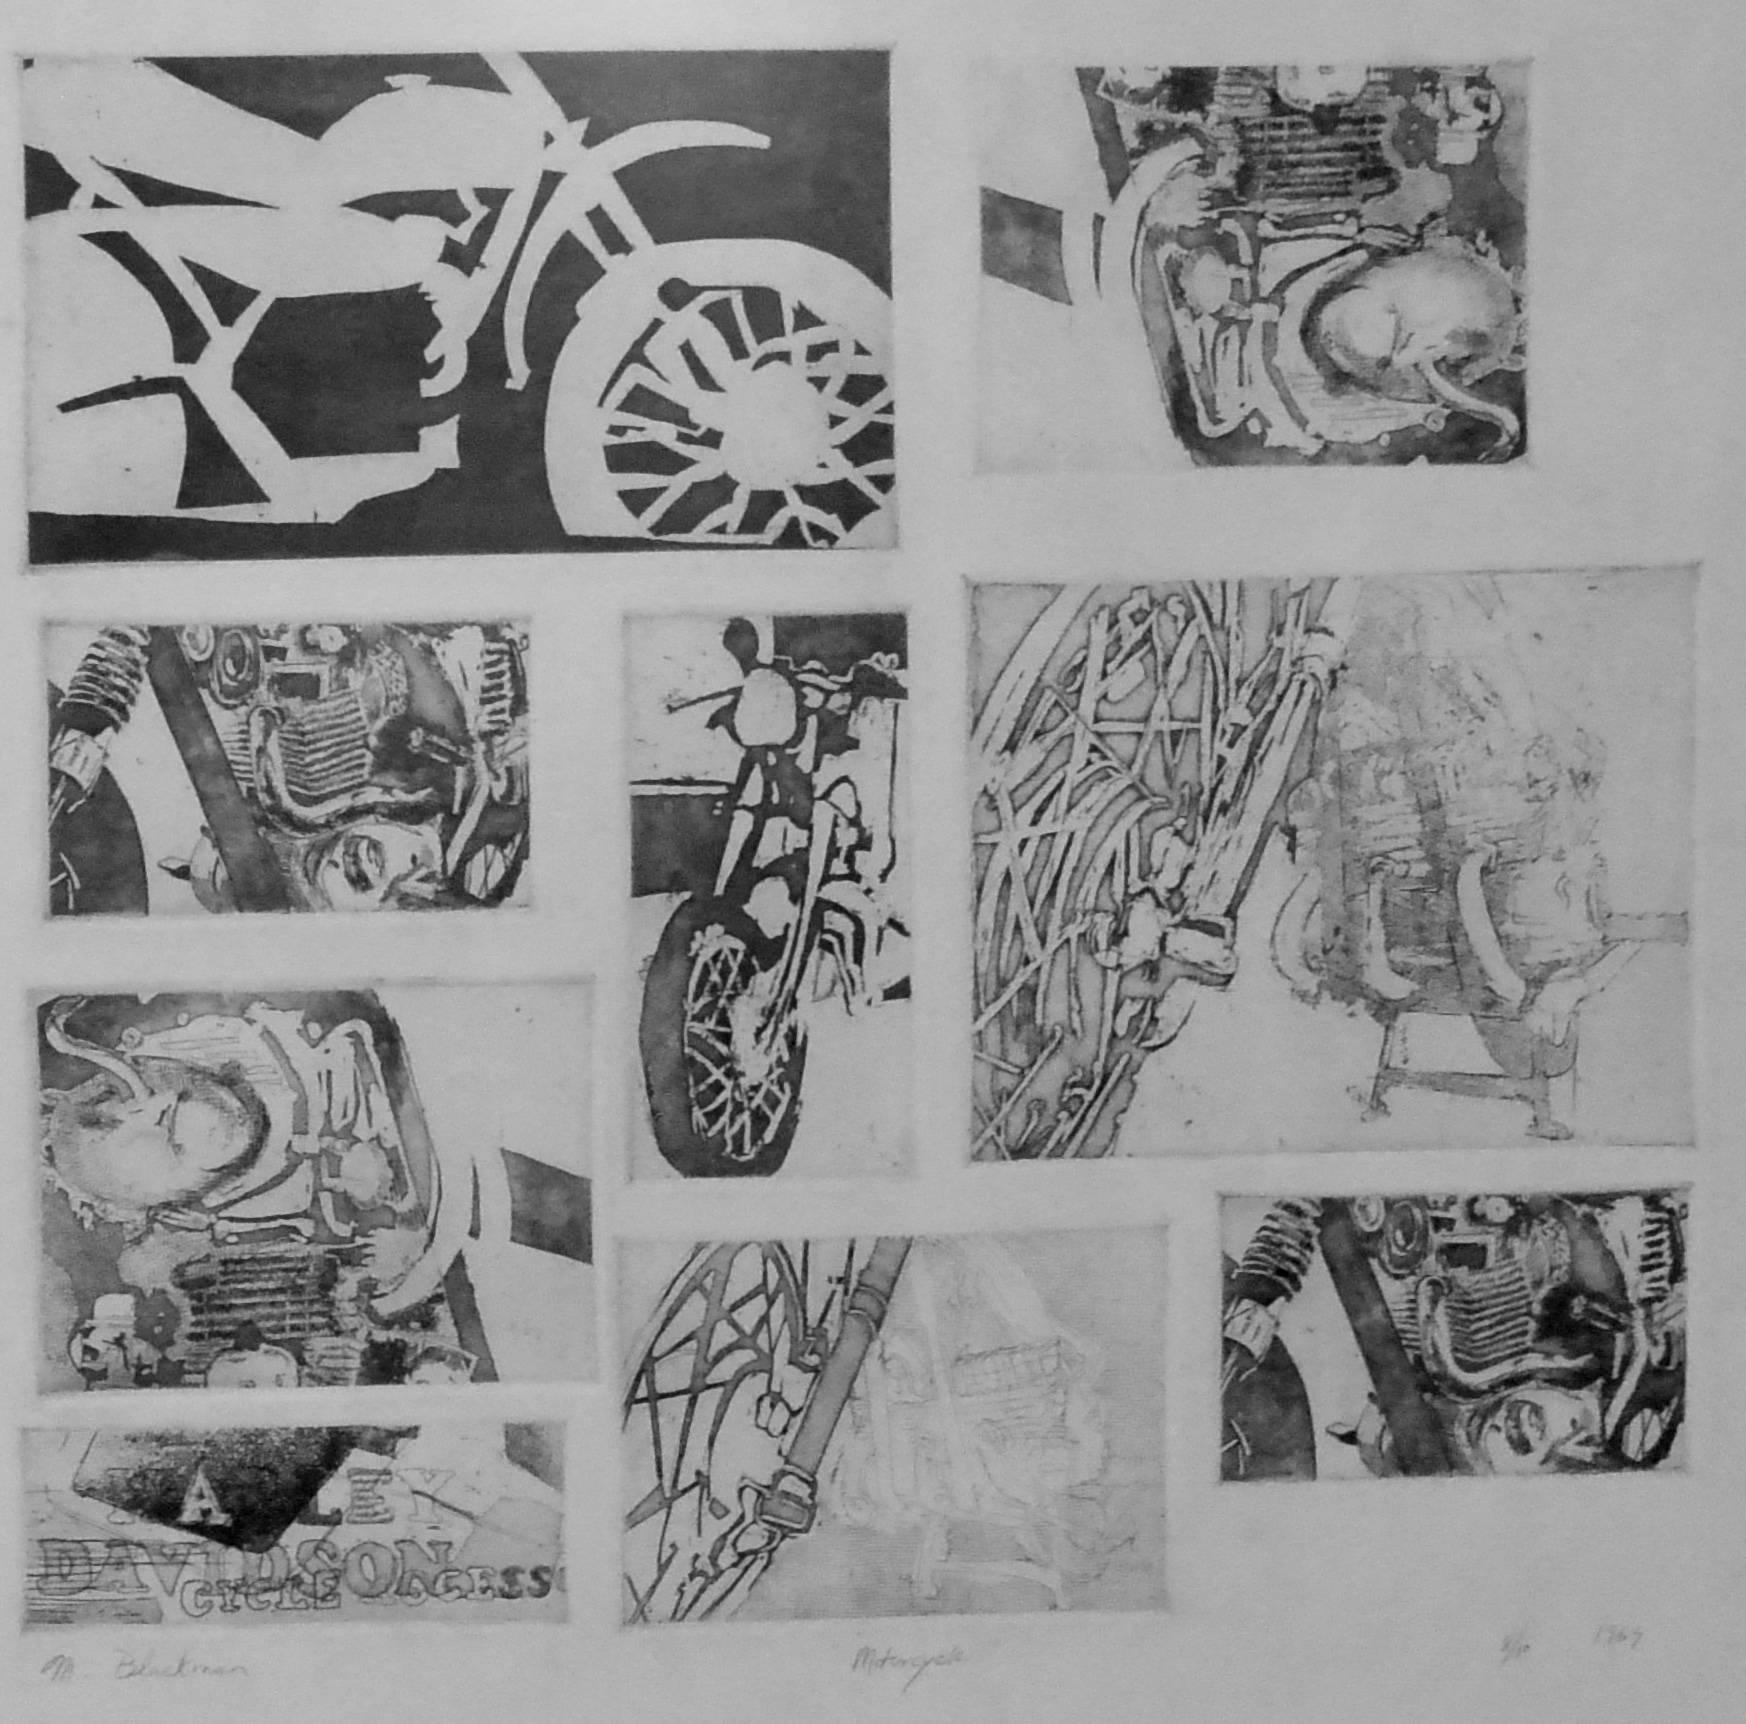 Harley Davidson motorcycle lithograph.  Original vintage black and white lithograph entitled 